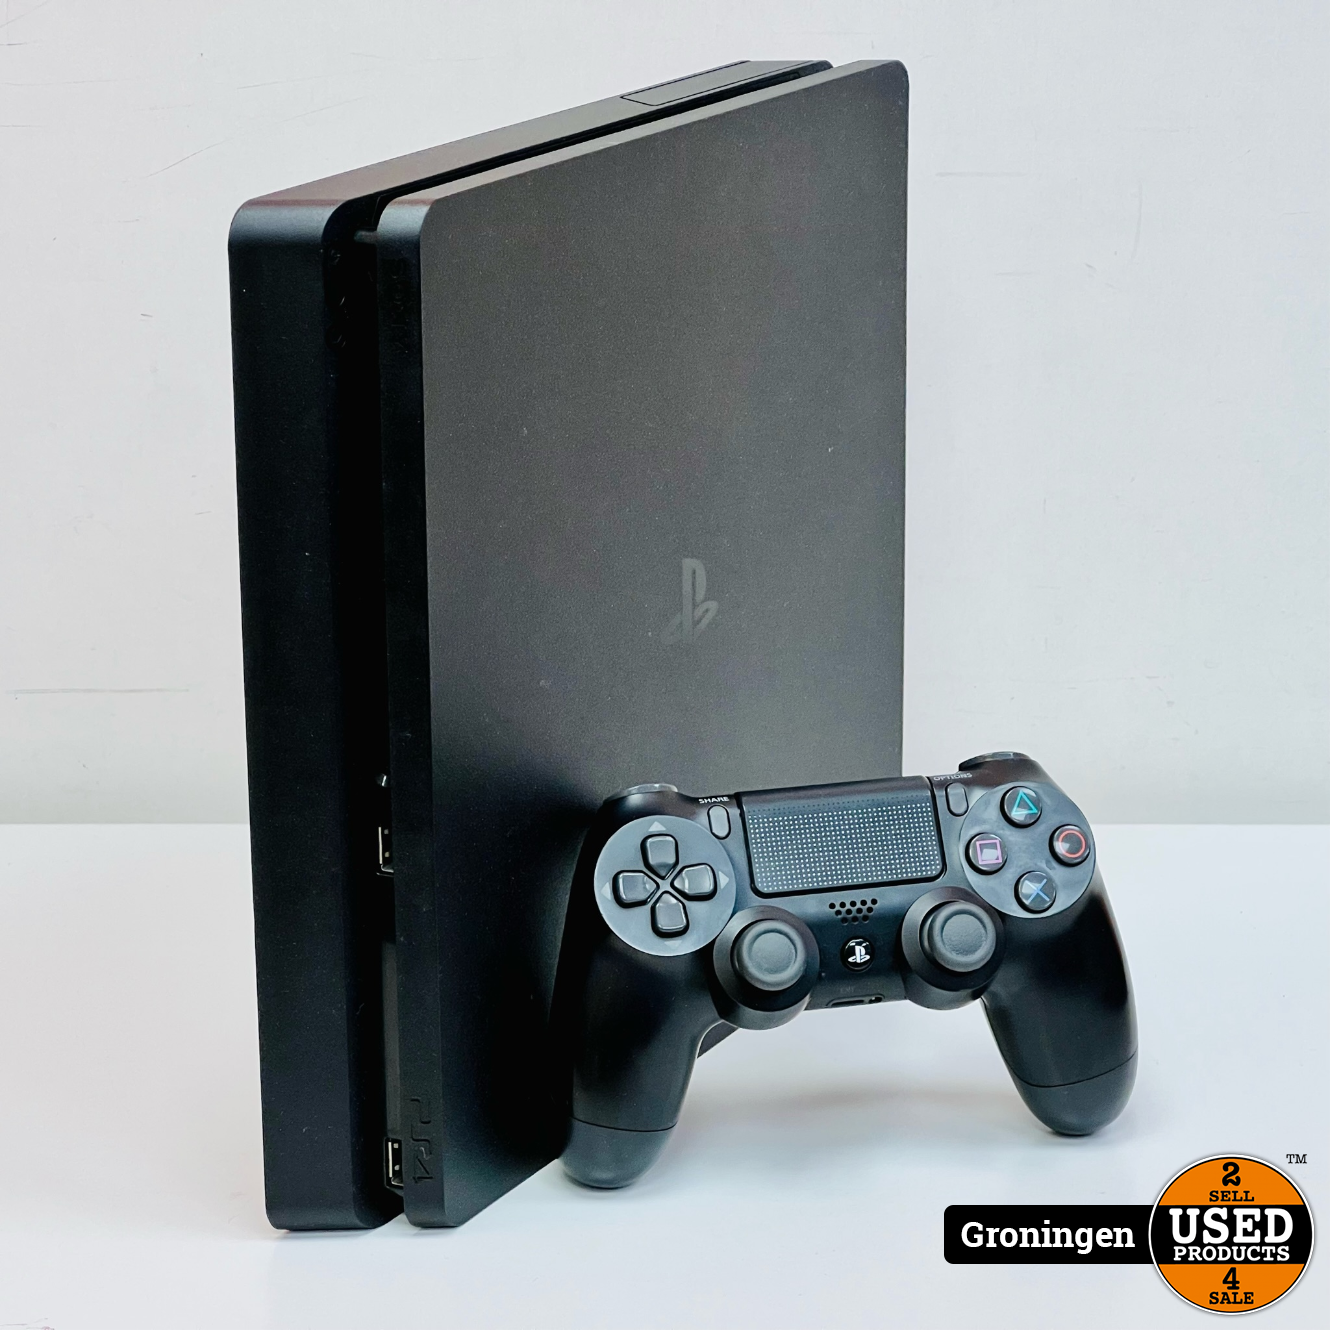 afvoer Patch neef PS4] Sony PlayStation 4 Slim 1TB Zwart | incl. Sony Dualshock Controller en  kabels - Used Products Groningen